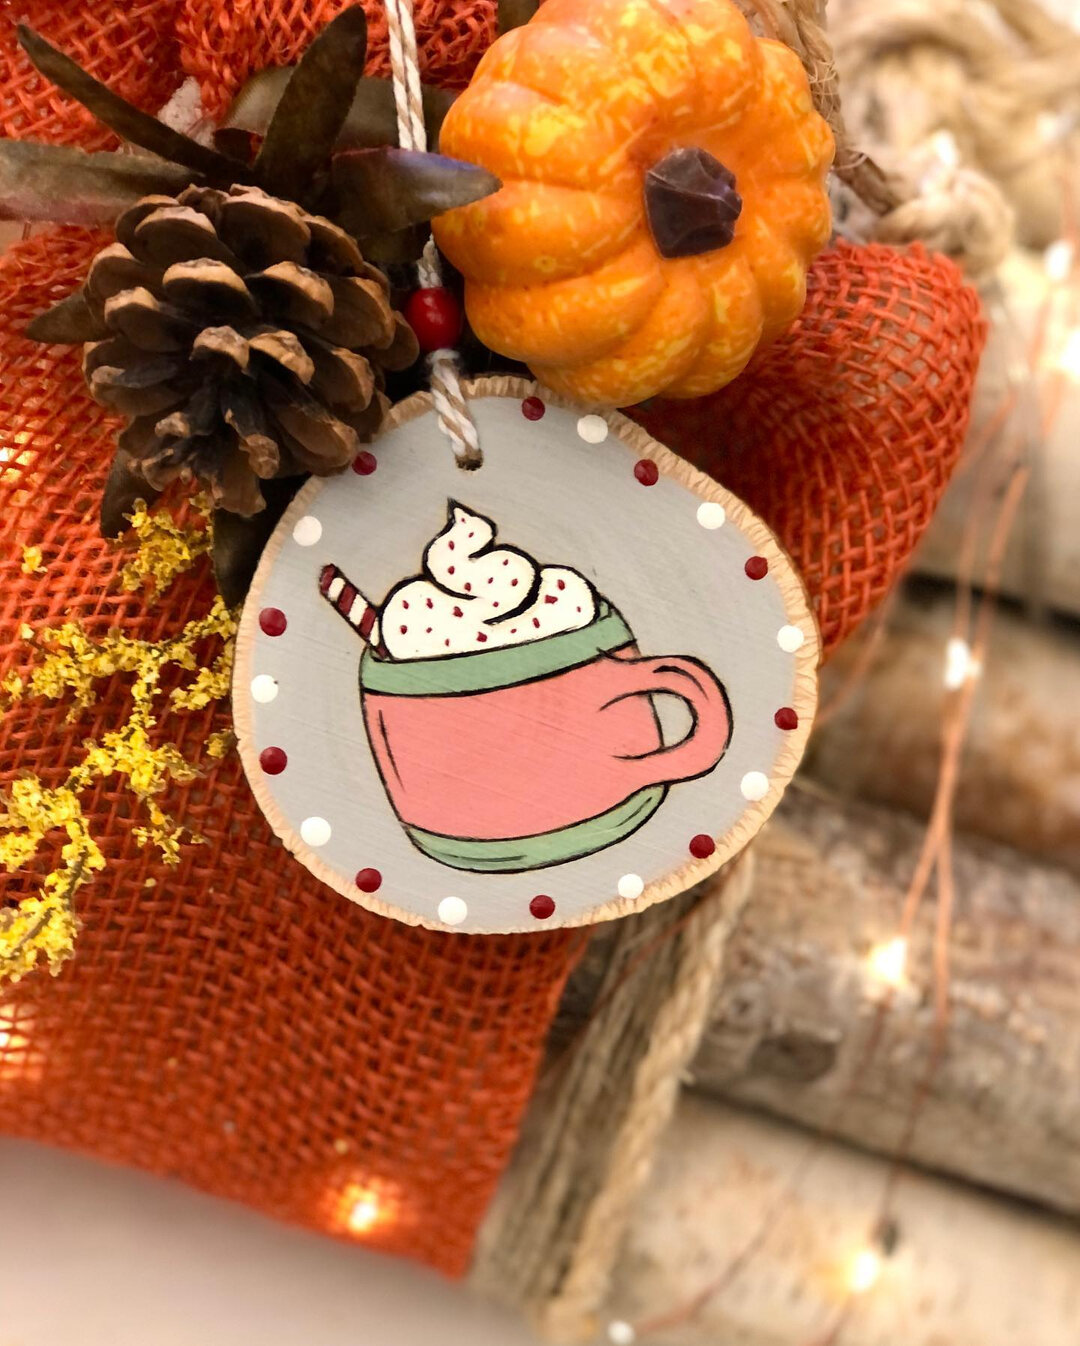 These cold, rainy days are getting me in the mood for hot chocolate. Specifically, hot chocolate with Bailey's and a sprinkle of kief...⁣
#hotcocoa #hotchocolate #rainydays #fall #winter #christmas #ornament #ornaments #woodburning #pyrography #wooda